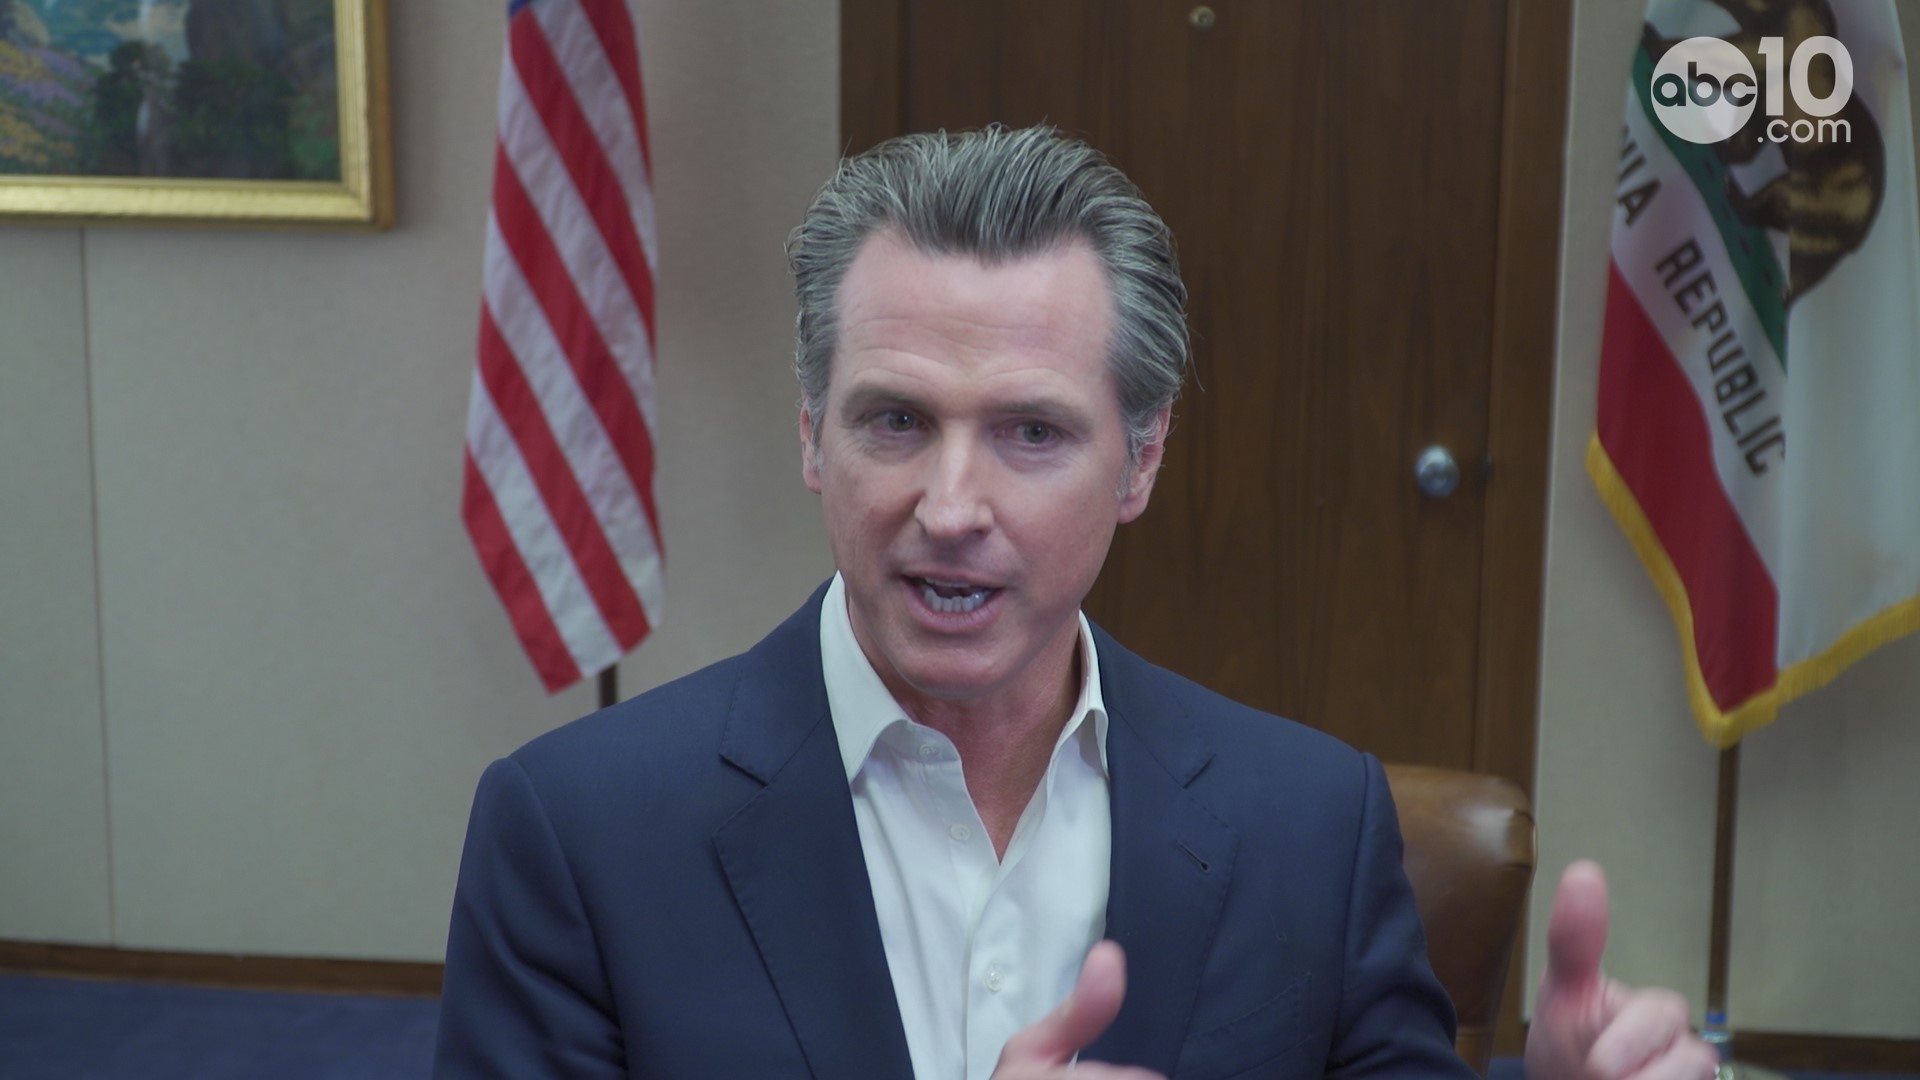 Governor Gavin Newsom answered questions about the status of bills in California, his thoughts on PG&E and the power shutoffs, and housing costs in the state.